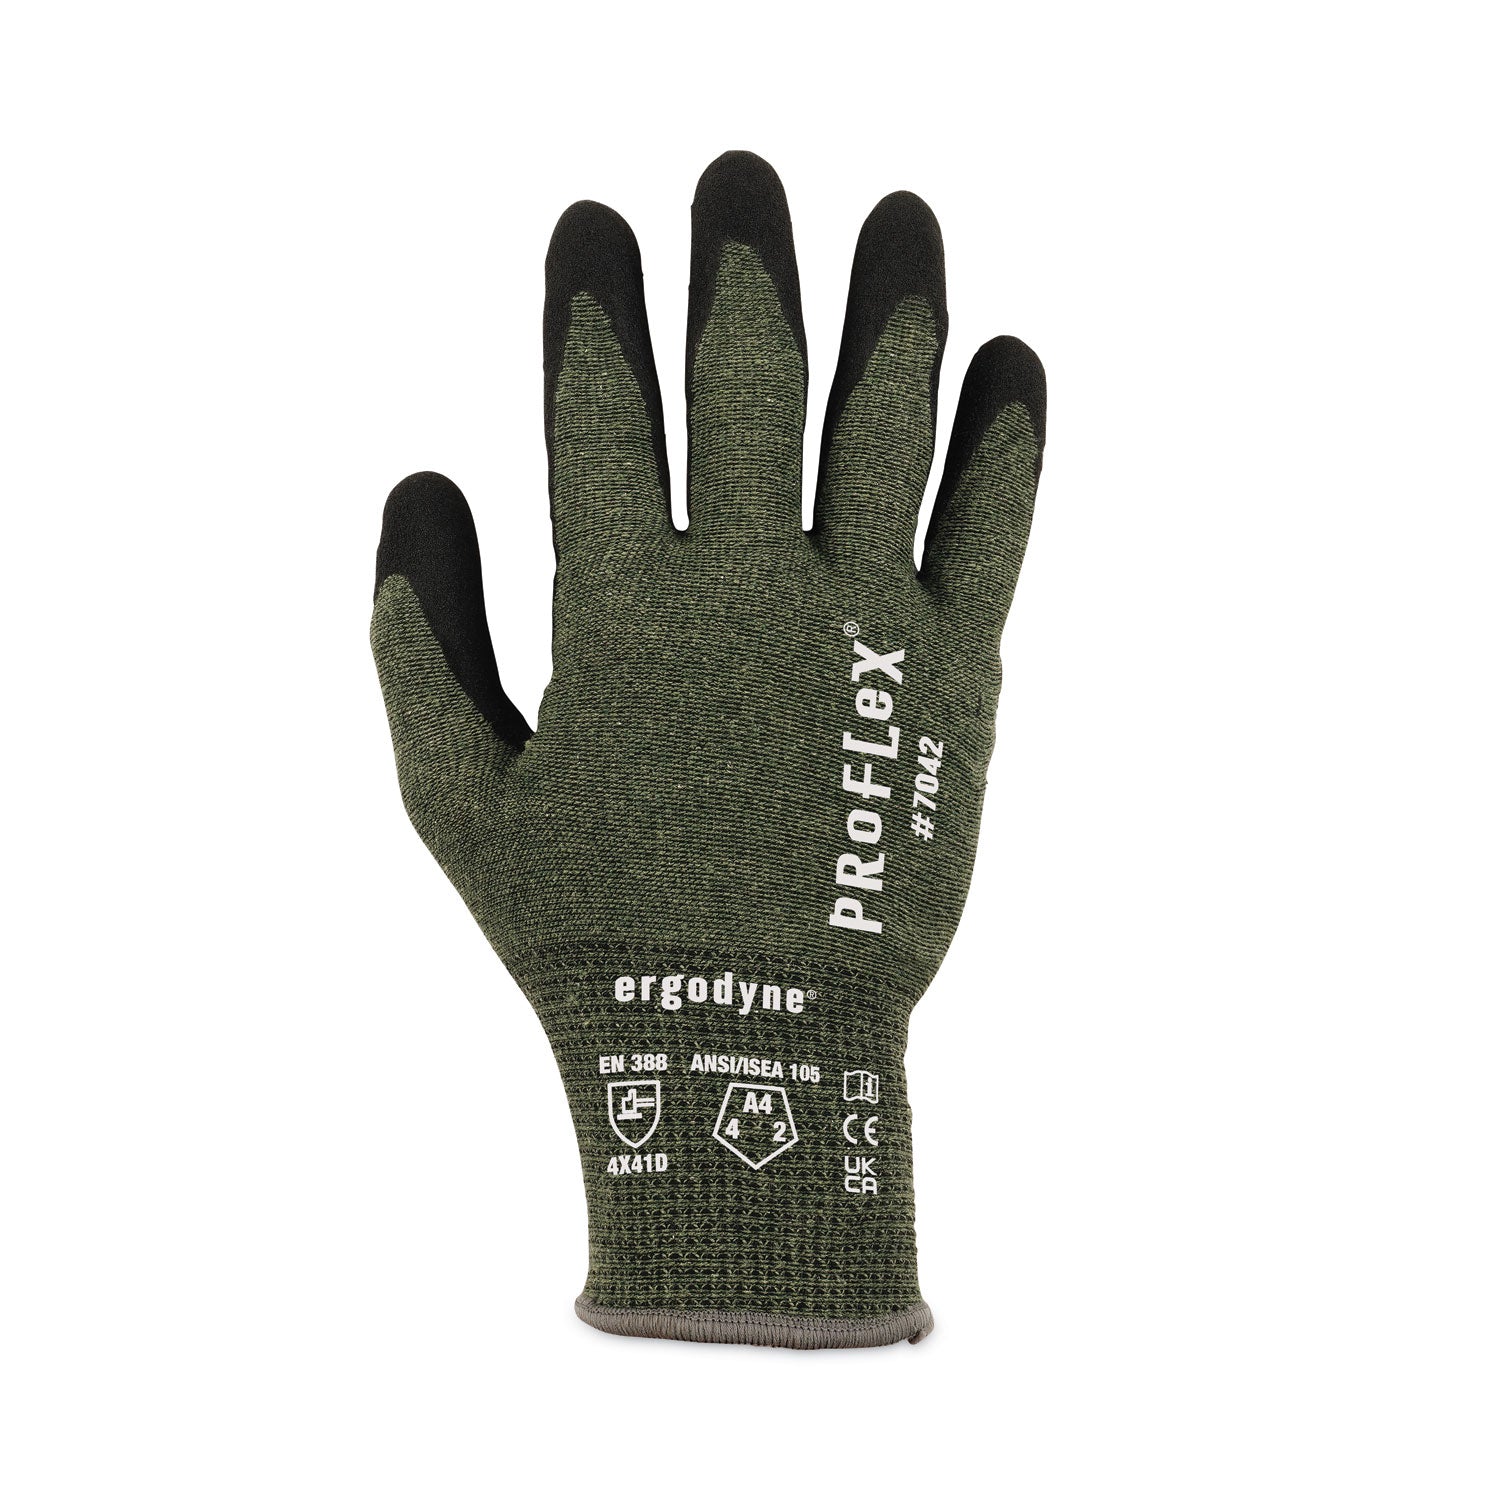 proflex-7042-ansi-a4-nitrile-coated-cr-gloves-green-x-large-pair-ships-in-1-3-business-days_ego10345 - 8